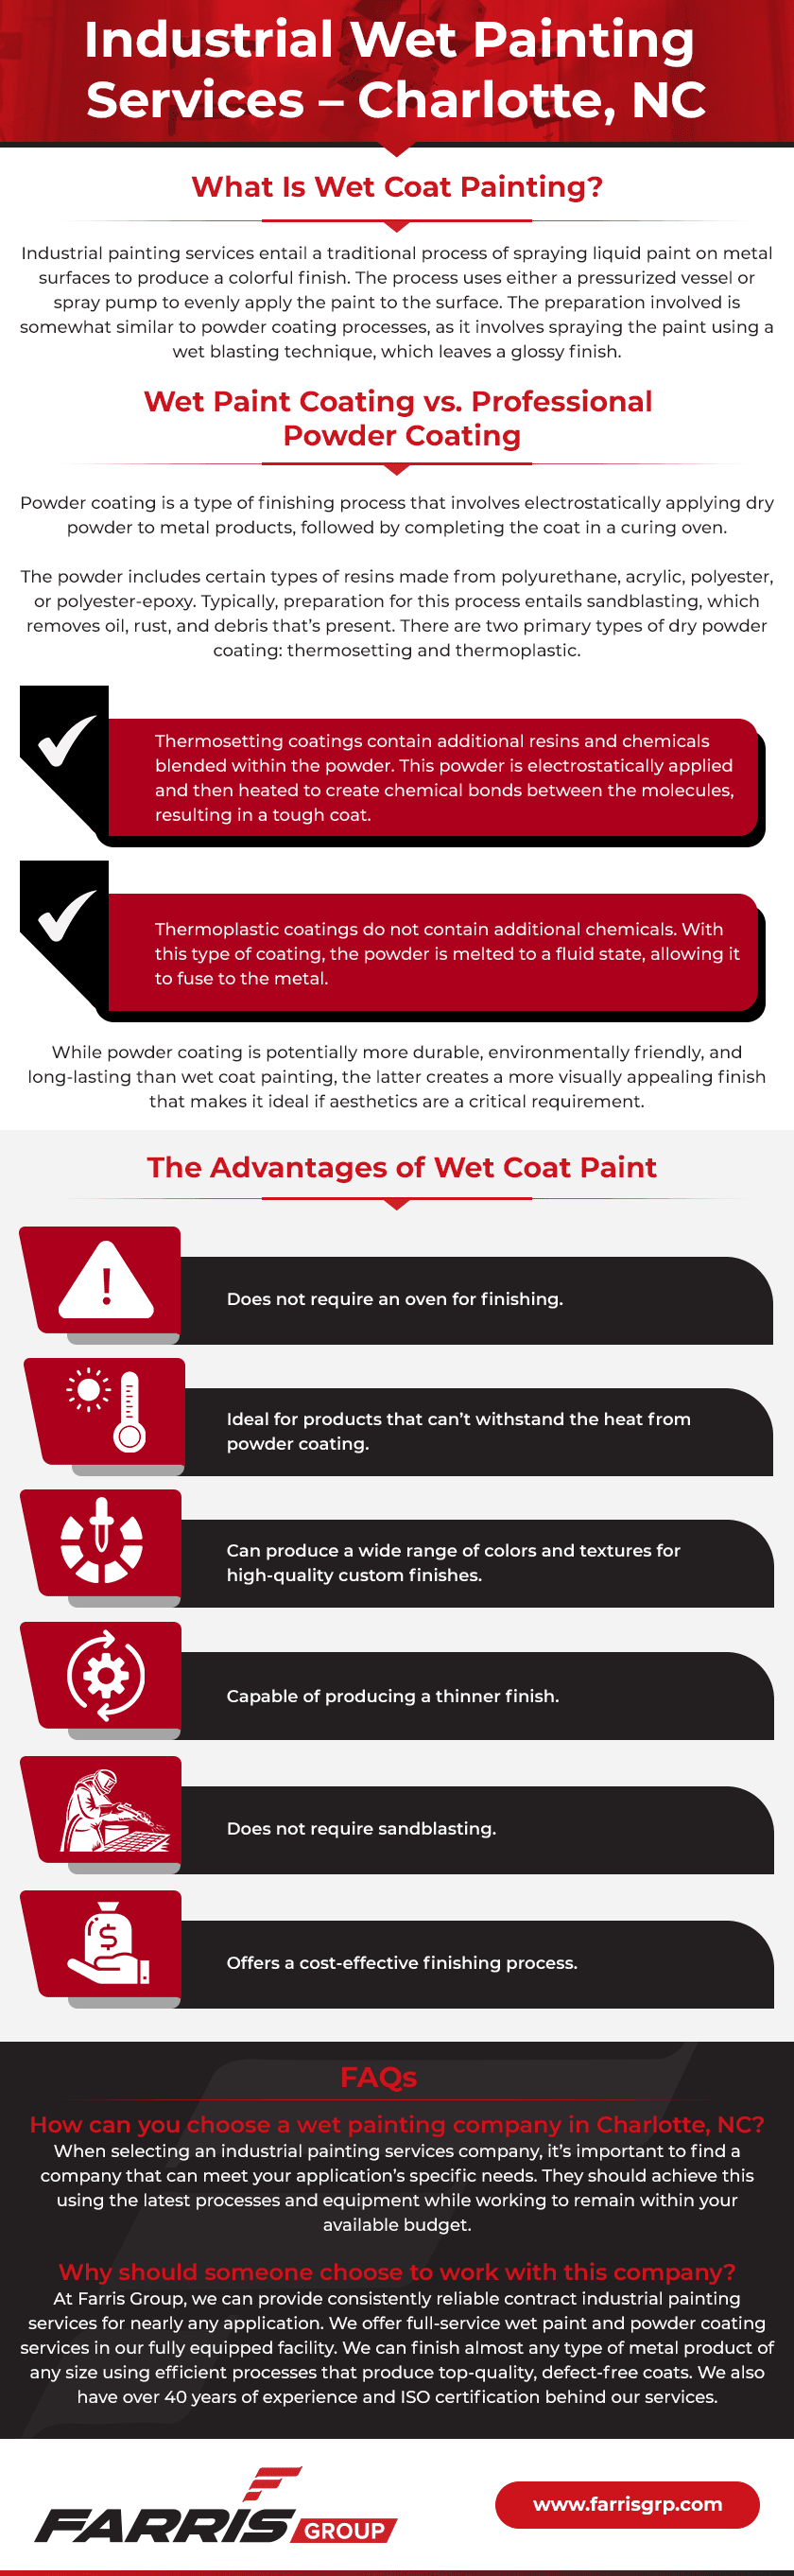 Industrial Wet Painting Services – Charlotte, NC